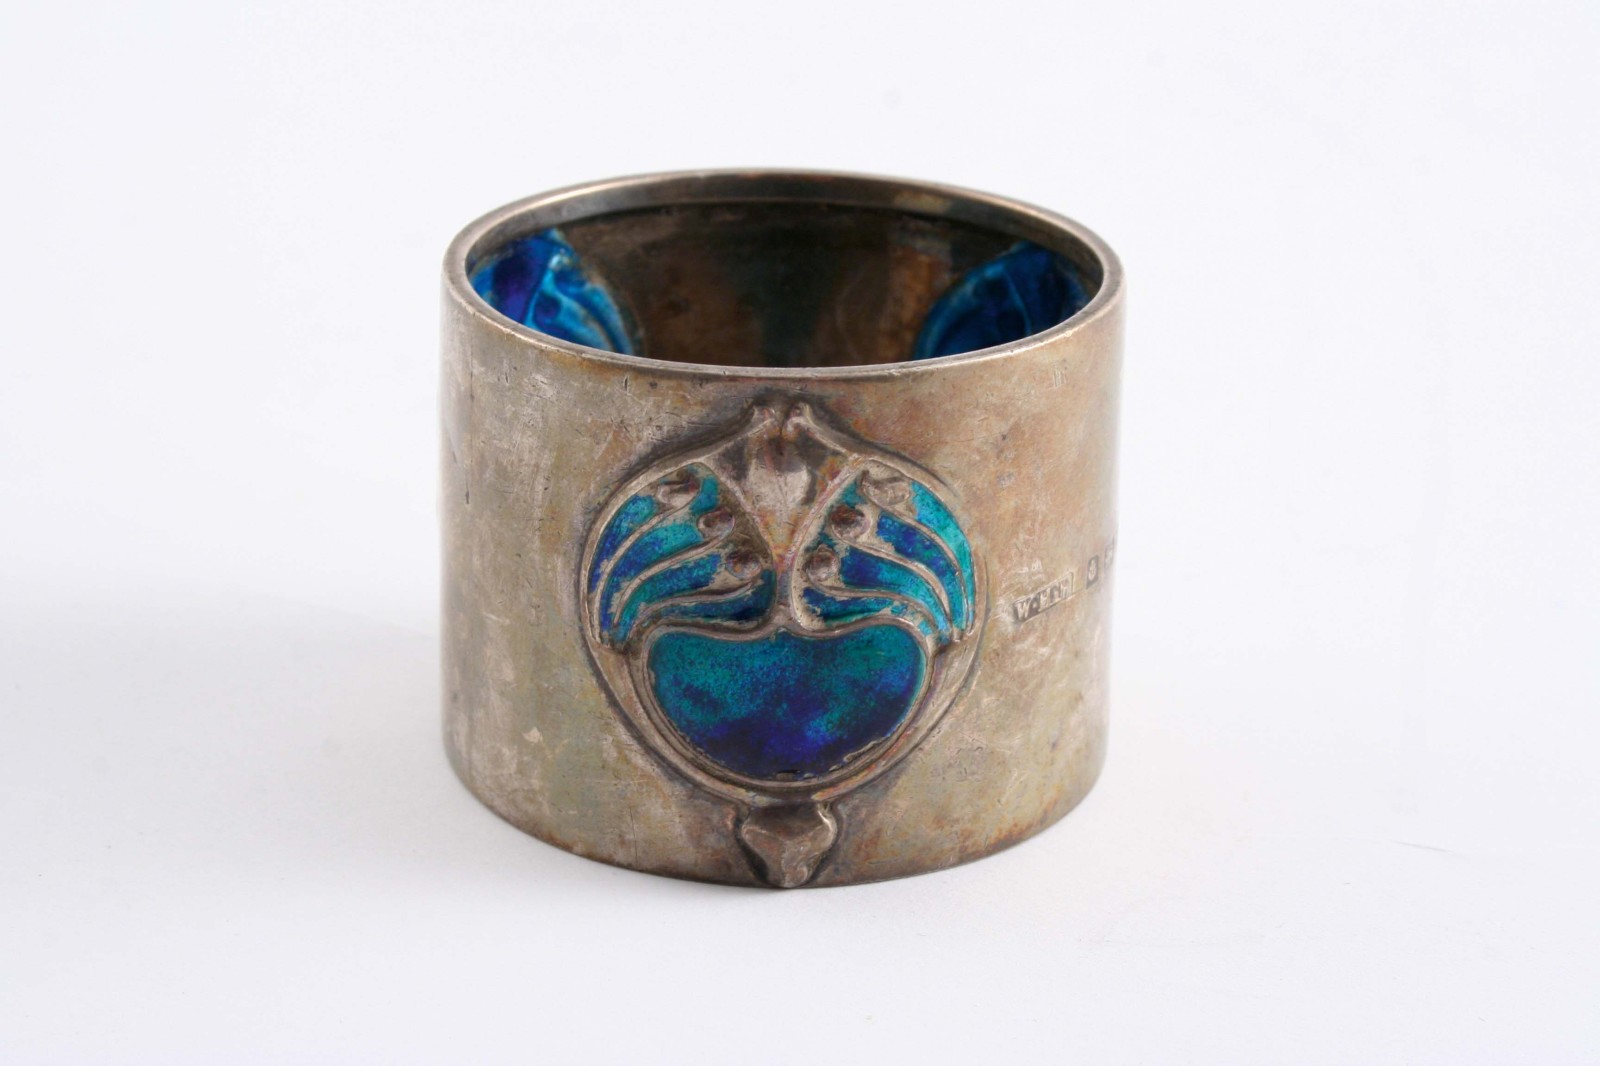 AN EDWARDIAN ART NOUVEAU NAPKIN RING decorated with three blue/turquoise enamelled motifs, by H.W.